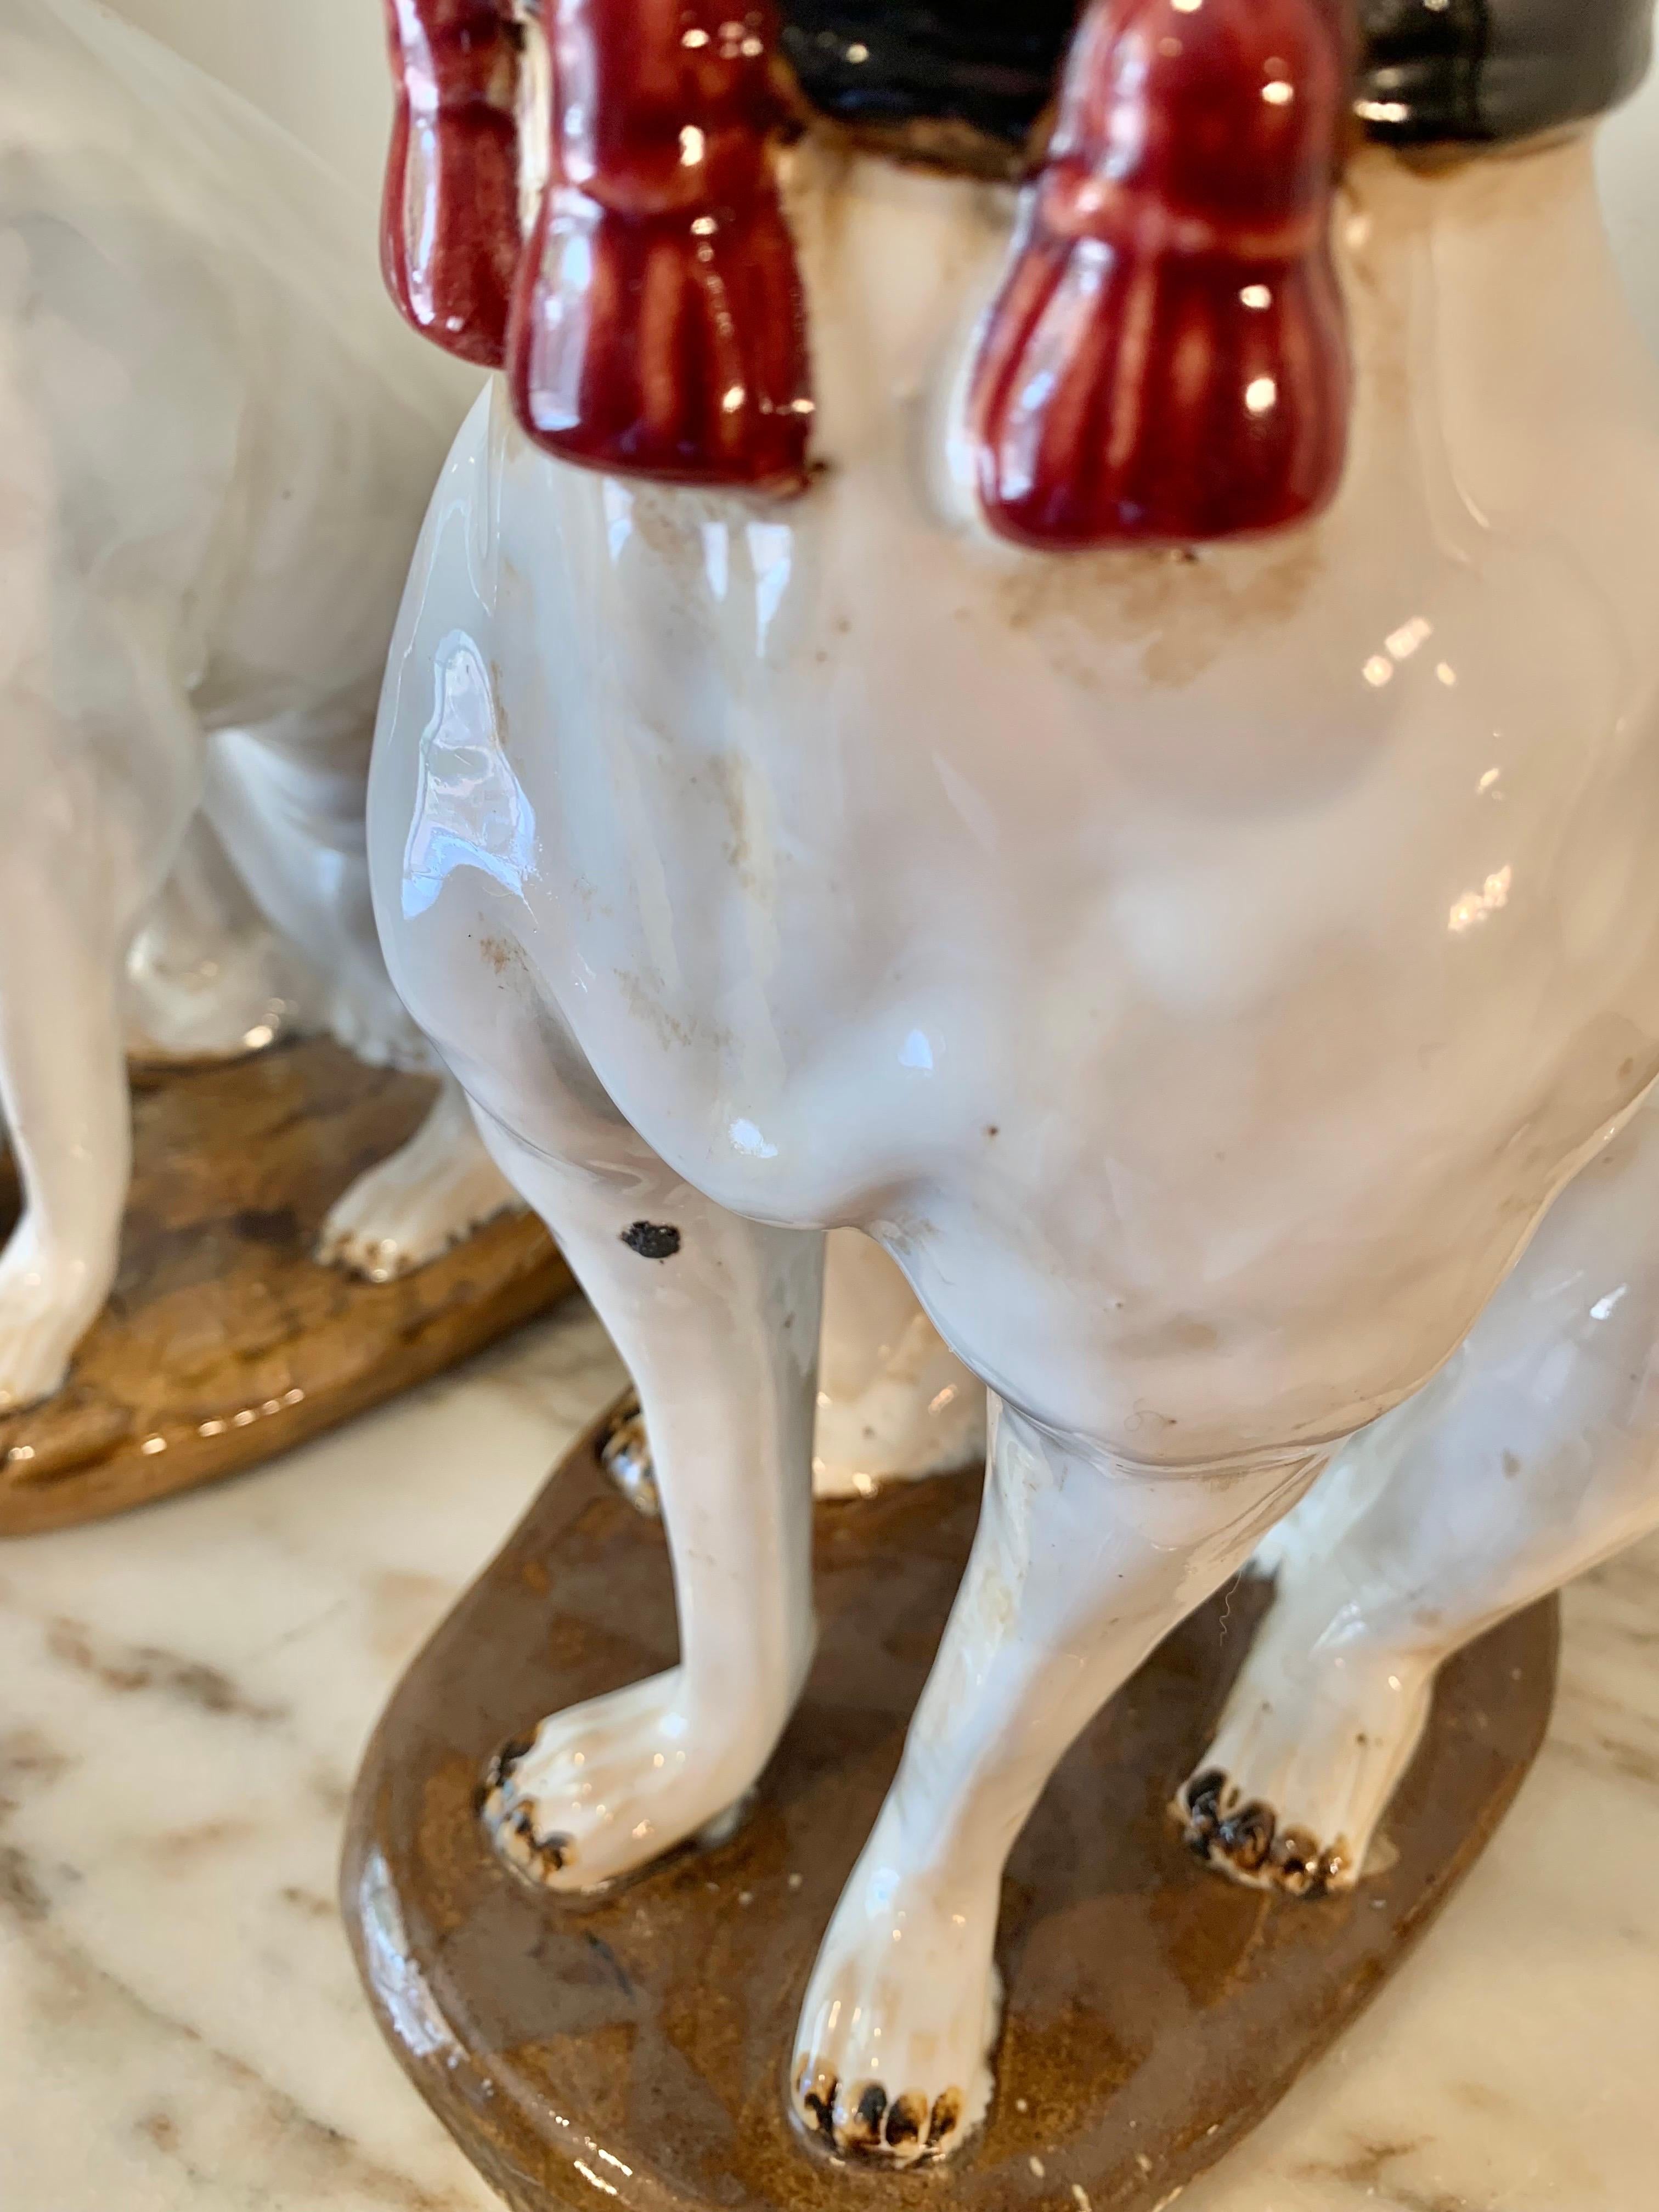 Mid 20th Century Italian Ceramic Whippet Sculptures - a Pair For Sale 6